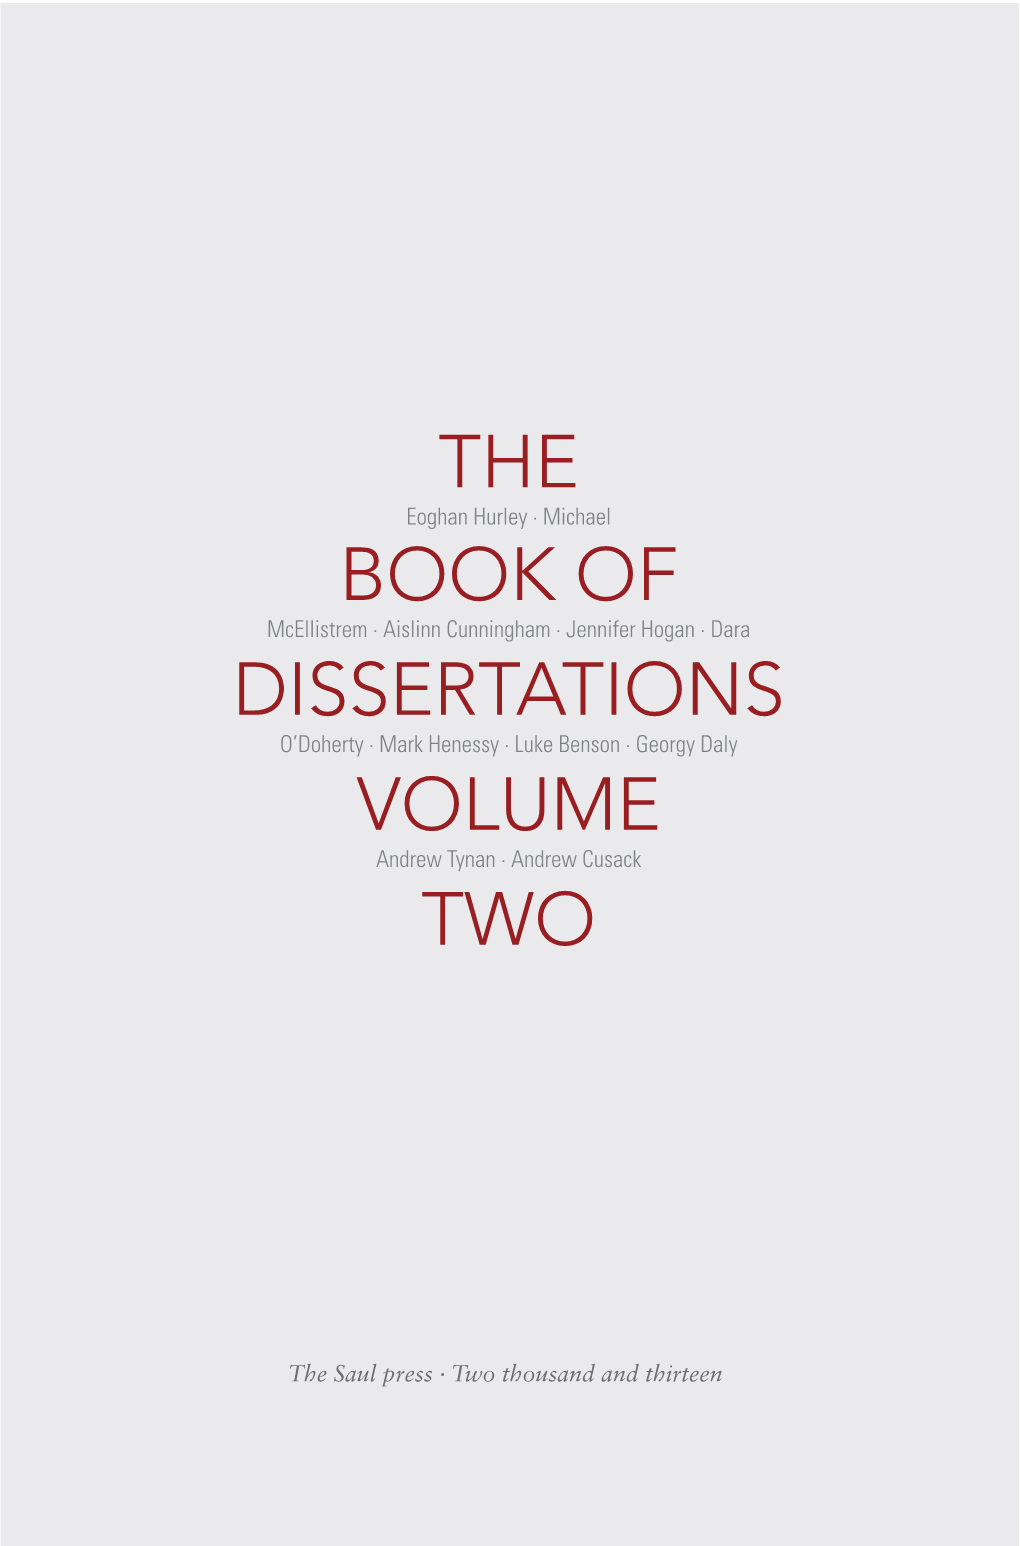 The Book of Dissertations Volume